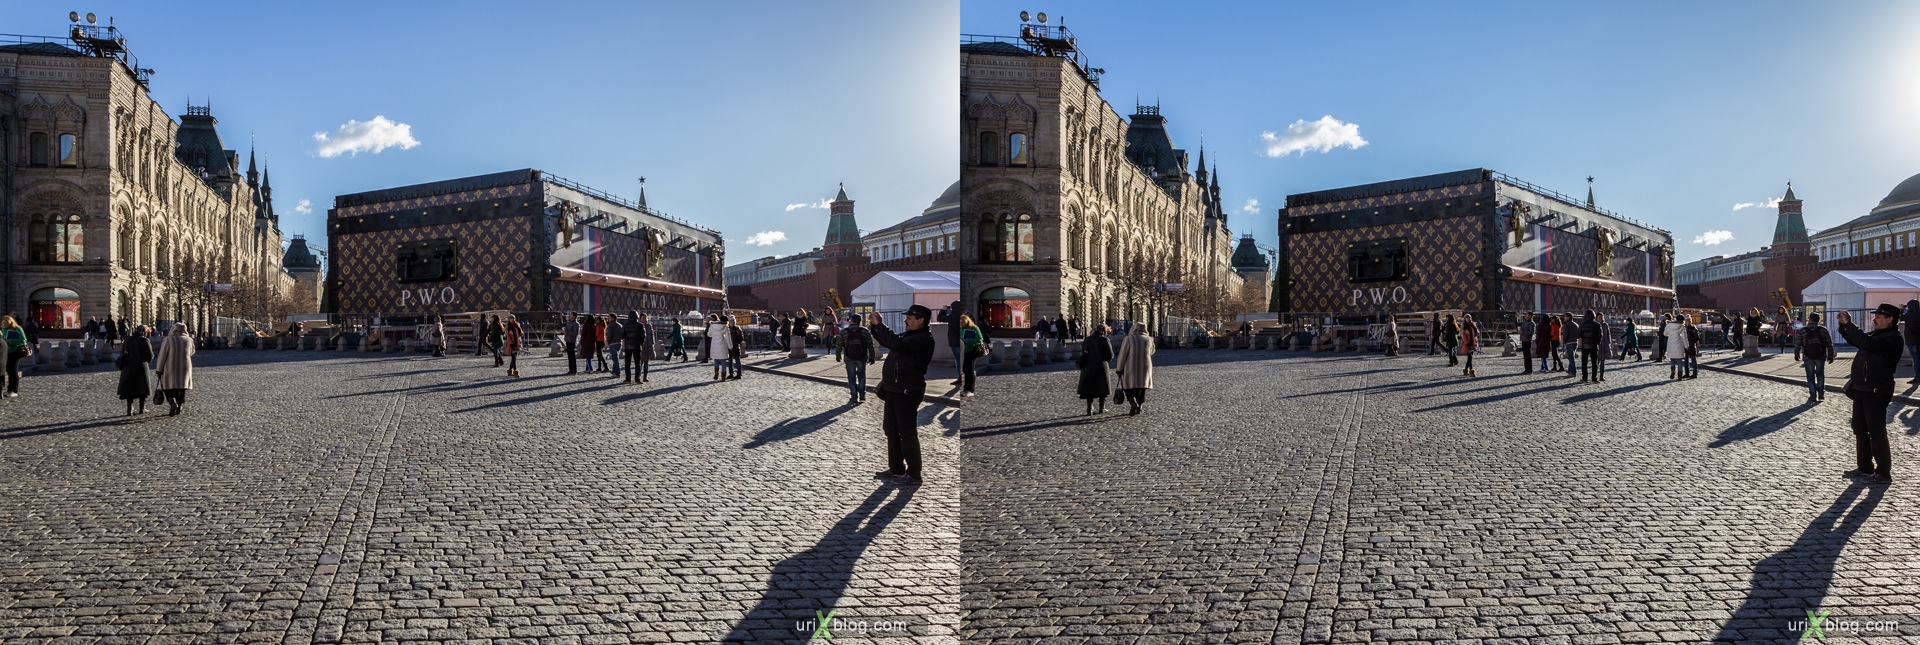 2013, Moscow, Russia, Red Square, street, new pedestrian zone, 3D, stereo pair, cross-eyed, crossview, cross view stereo pair, stereoscopic